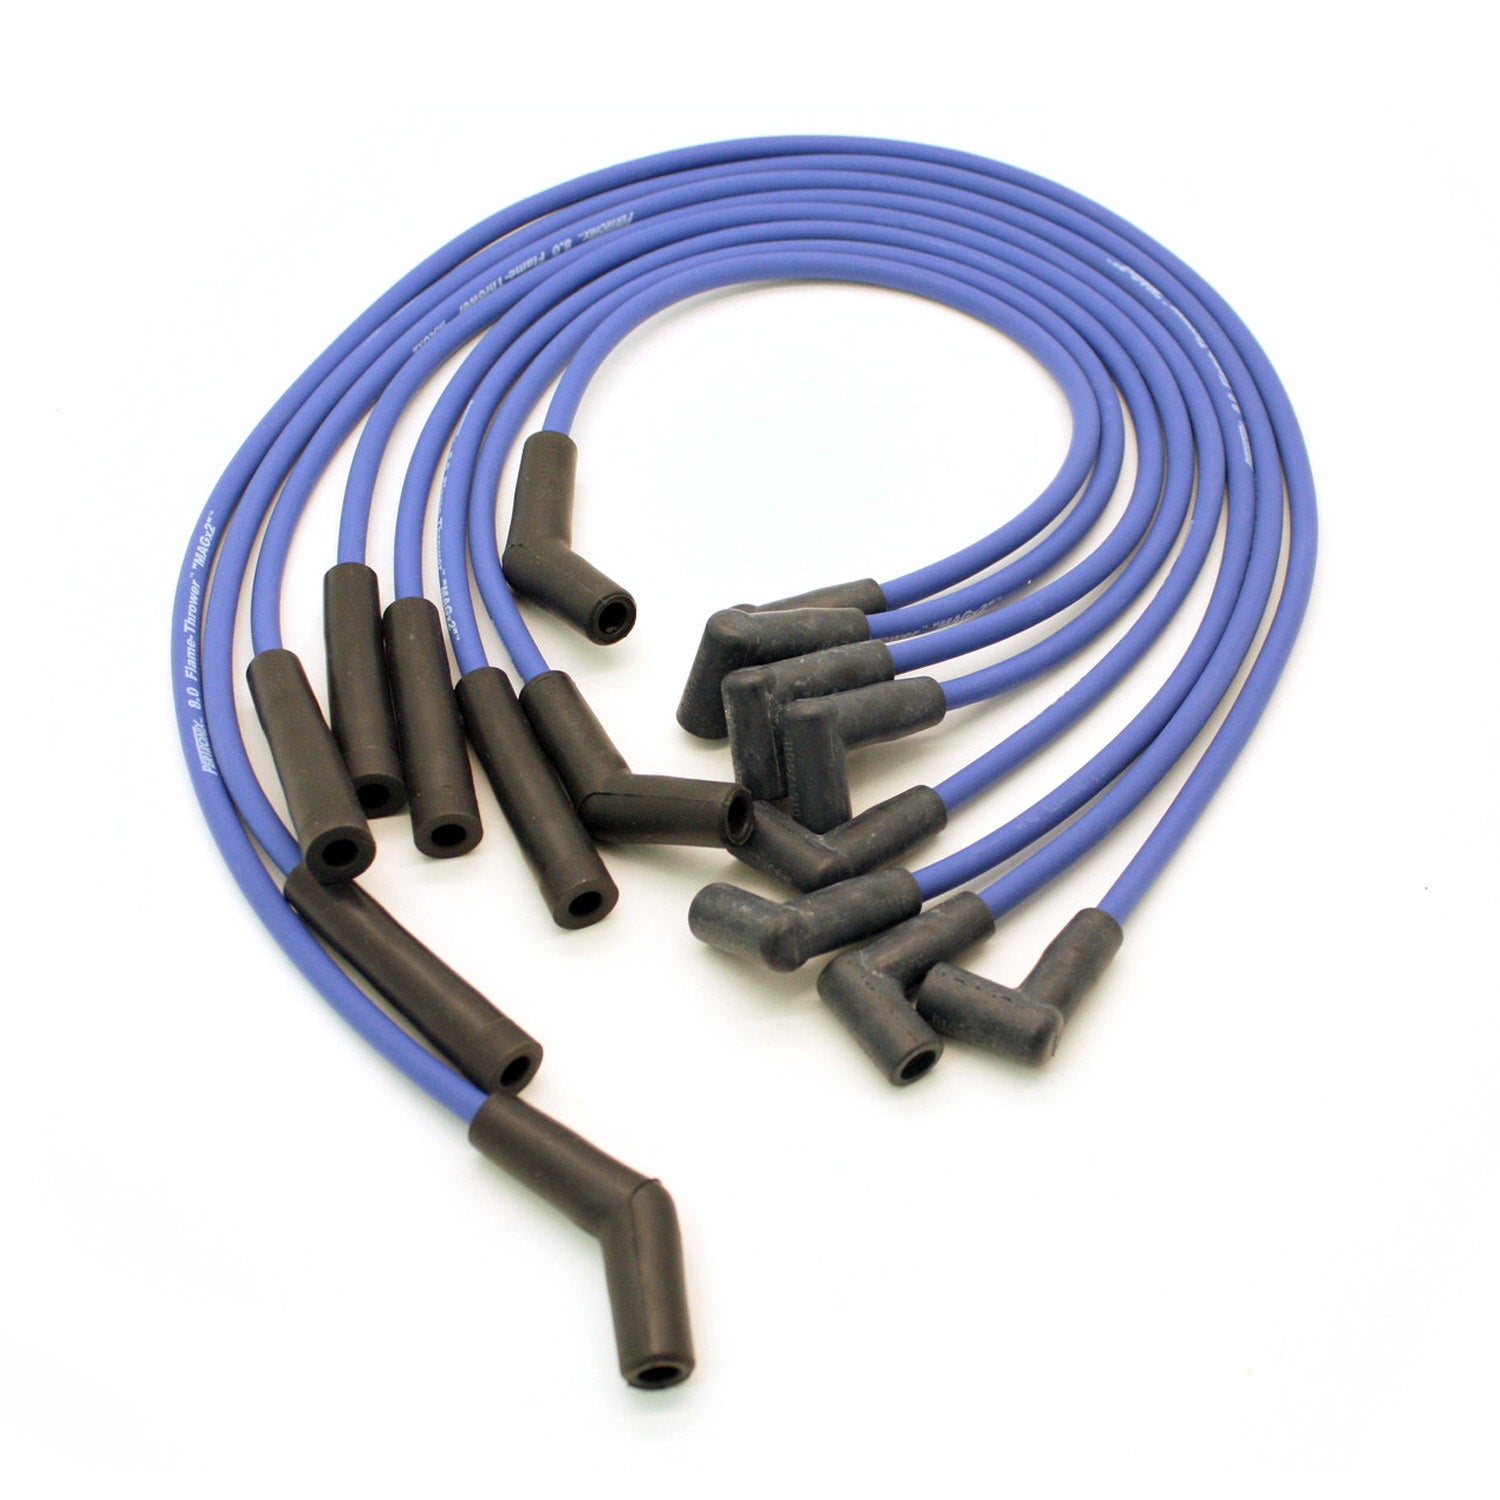 PerTronix 808302 Flame-Thrower Spark Plug Wires 8 cyl 8mm GM HEI Custom Fit Blue